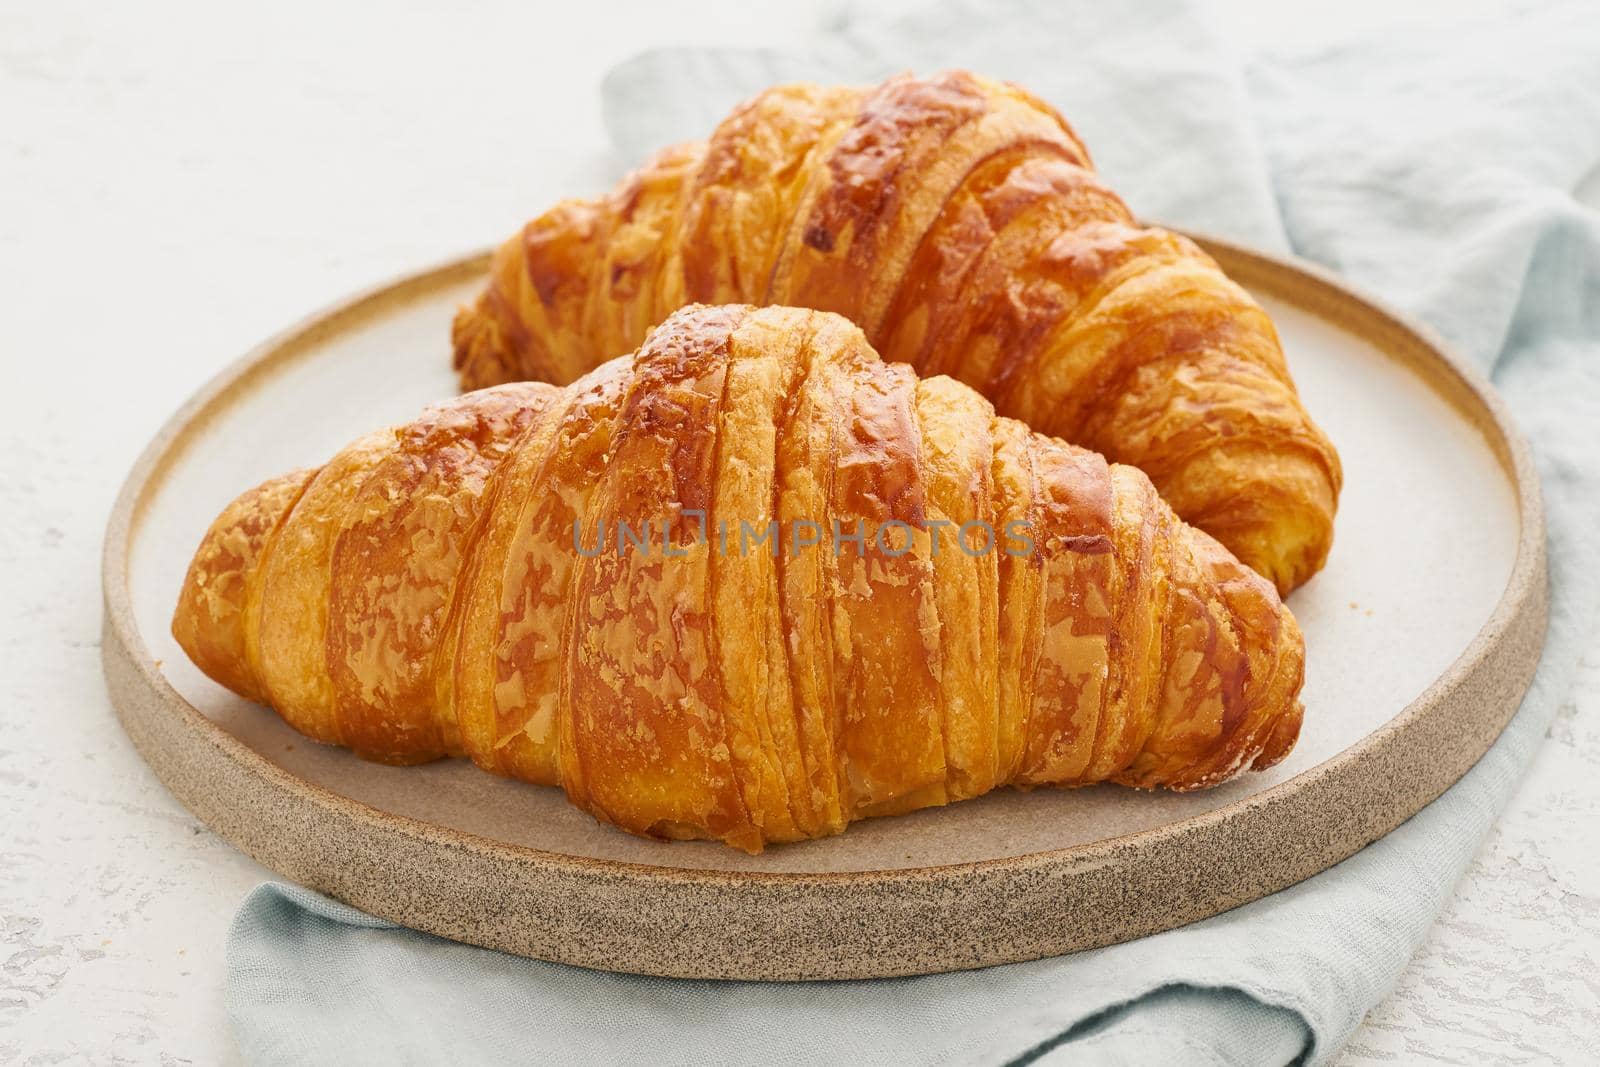 Two delicious croissants on a plate and a hot drink in a mug. Morning French breakfast with fresh pastries. Light gray background.